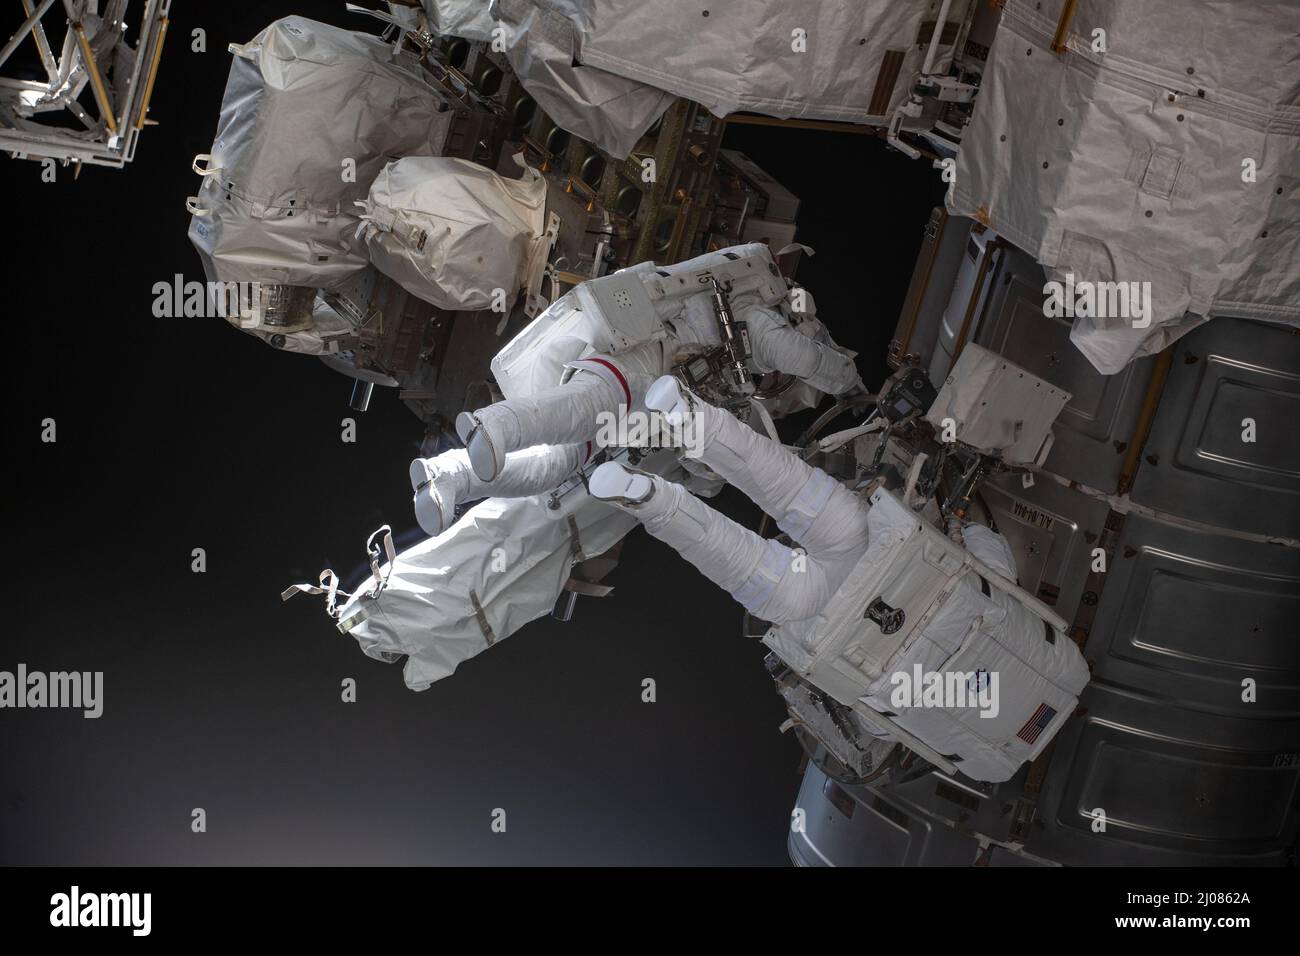 International Space Station, Earth Orbit. 15th Mar, 2022. International Space Station, EARTH ORBIT. 15 March, 2022. NASA astronauts Kayla Barron, left, and Raja Chari, right, exit the Quest airlock as they begin a nearly 7 hour long spacewalk to prepare the International Space Station for the next roll-out solar array, March 15, 2022 in Earth Orbit. Credit: NASA/NASA/Alamy Live News Stock Photo